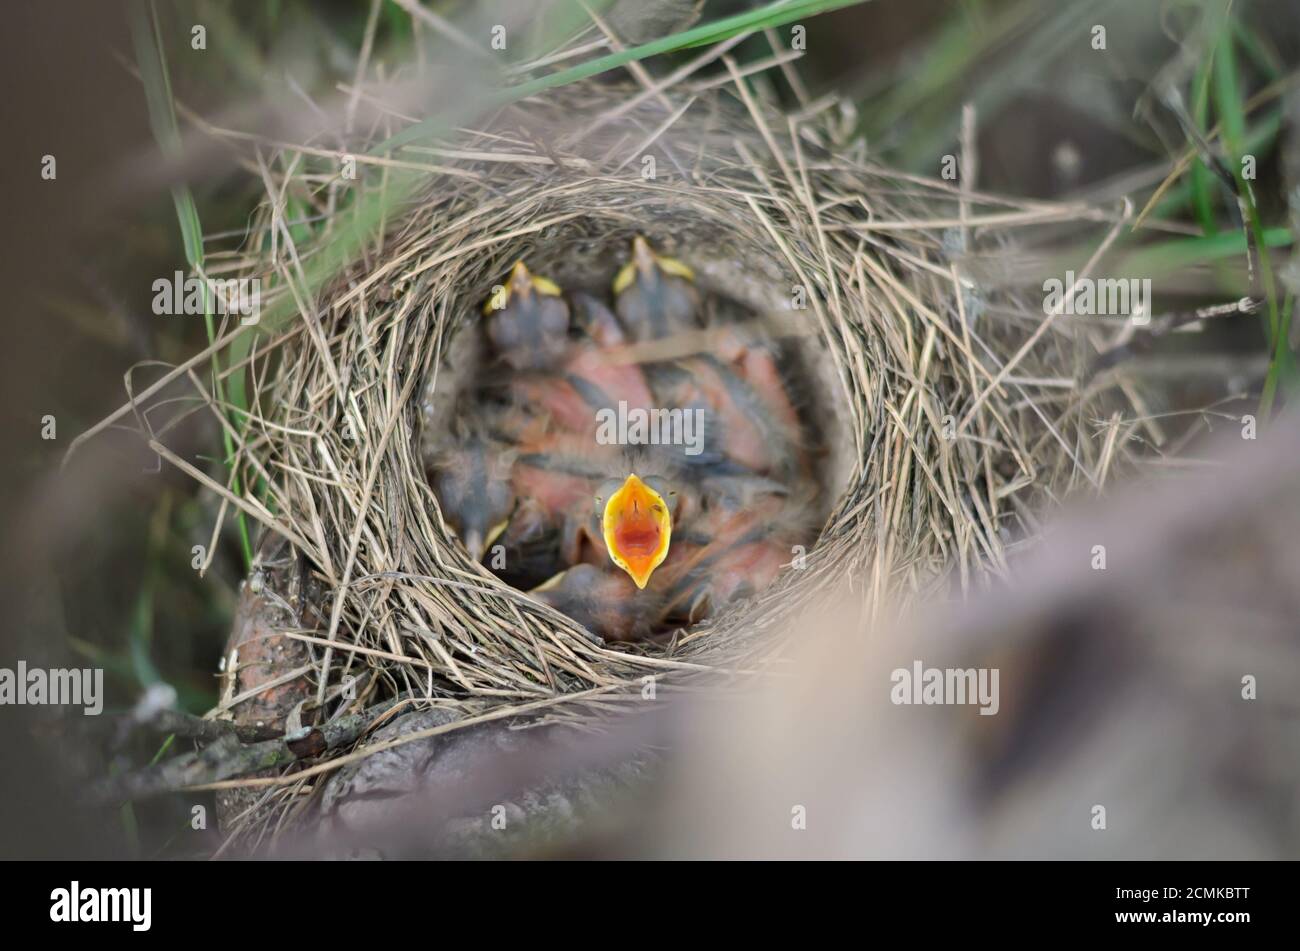 Little newborn baby bird of a Song thrush (Turdus philomelos) with beak wide open asking for food. Fauna of Ukraine. Shallow depth of field, closeup. Stock Photo